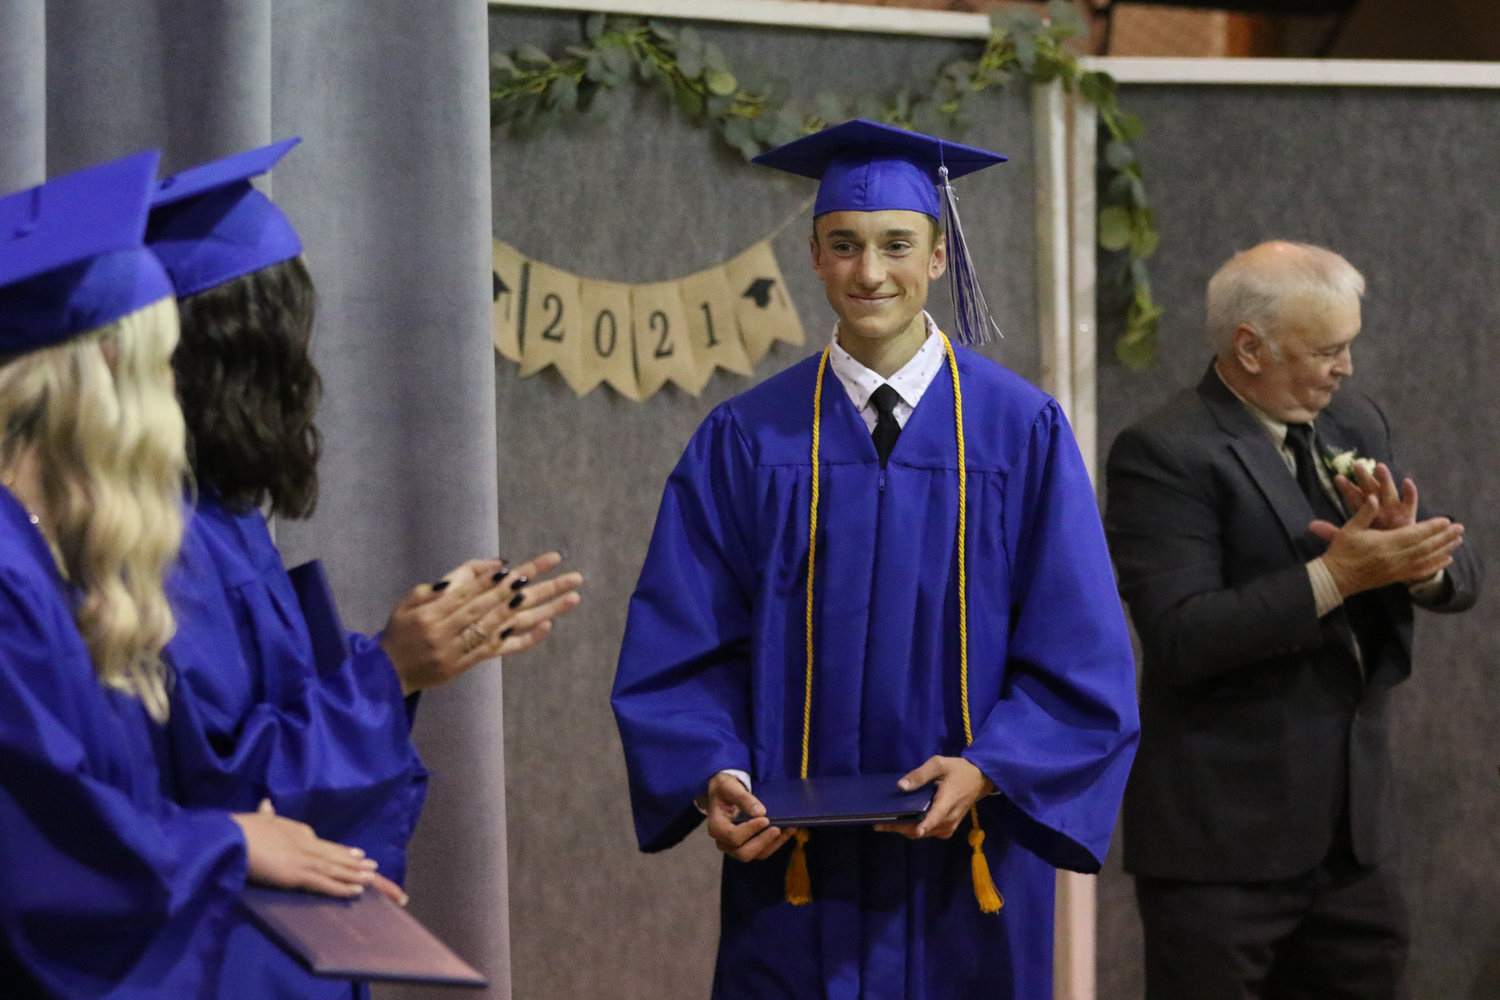 Jamison Stutzman walks across the stage with his diploma during Pathway Christian School's graduation ceremony on May 16, 2021.